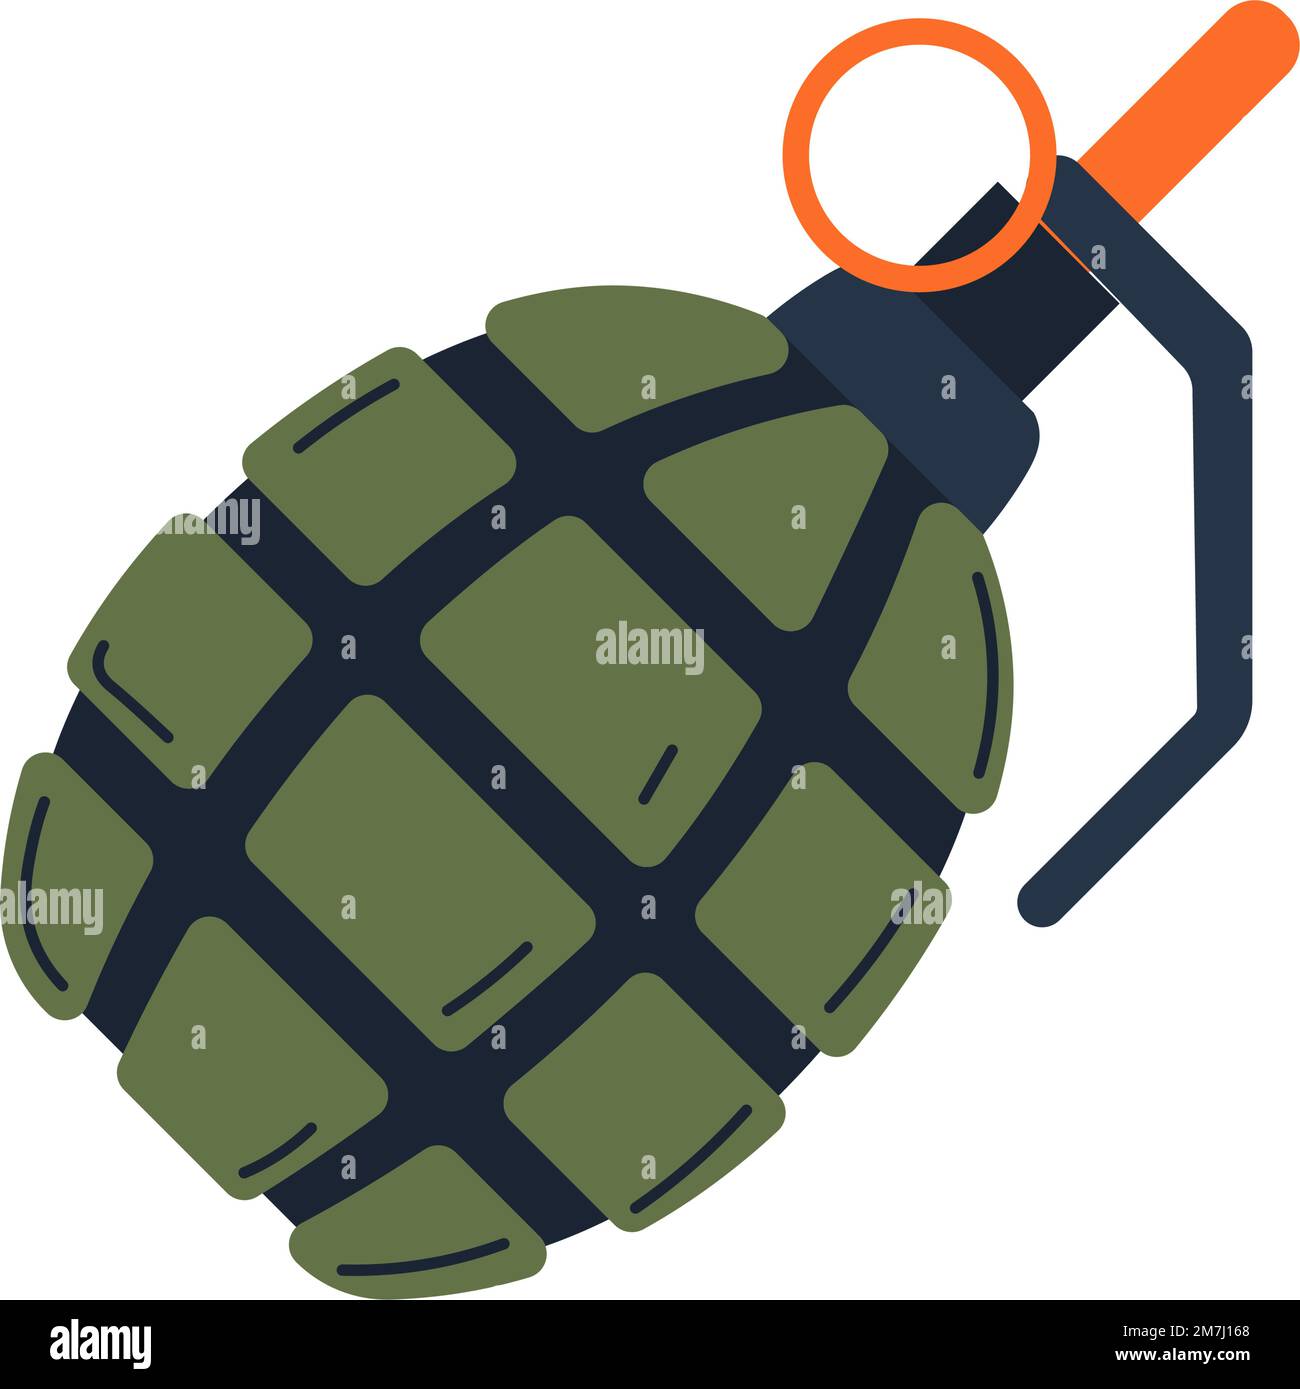 Bomb explosive weapons, hand grenade with rifle Stock Vector